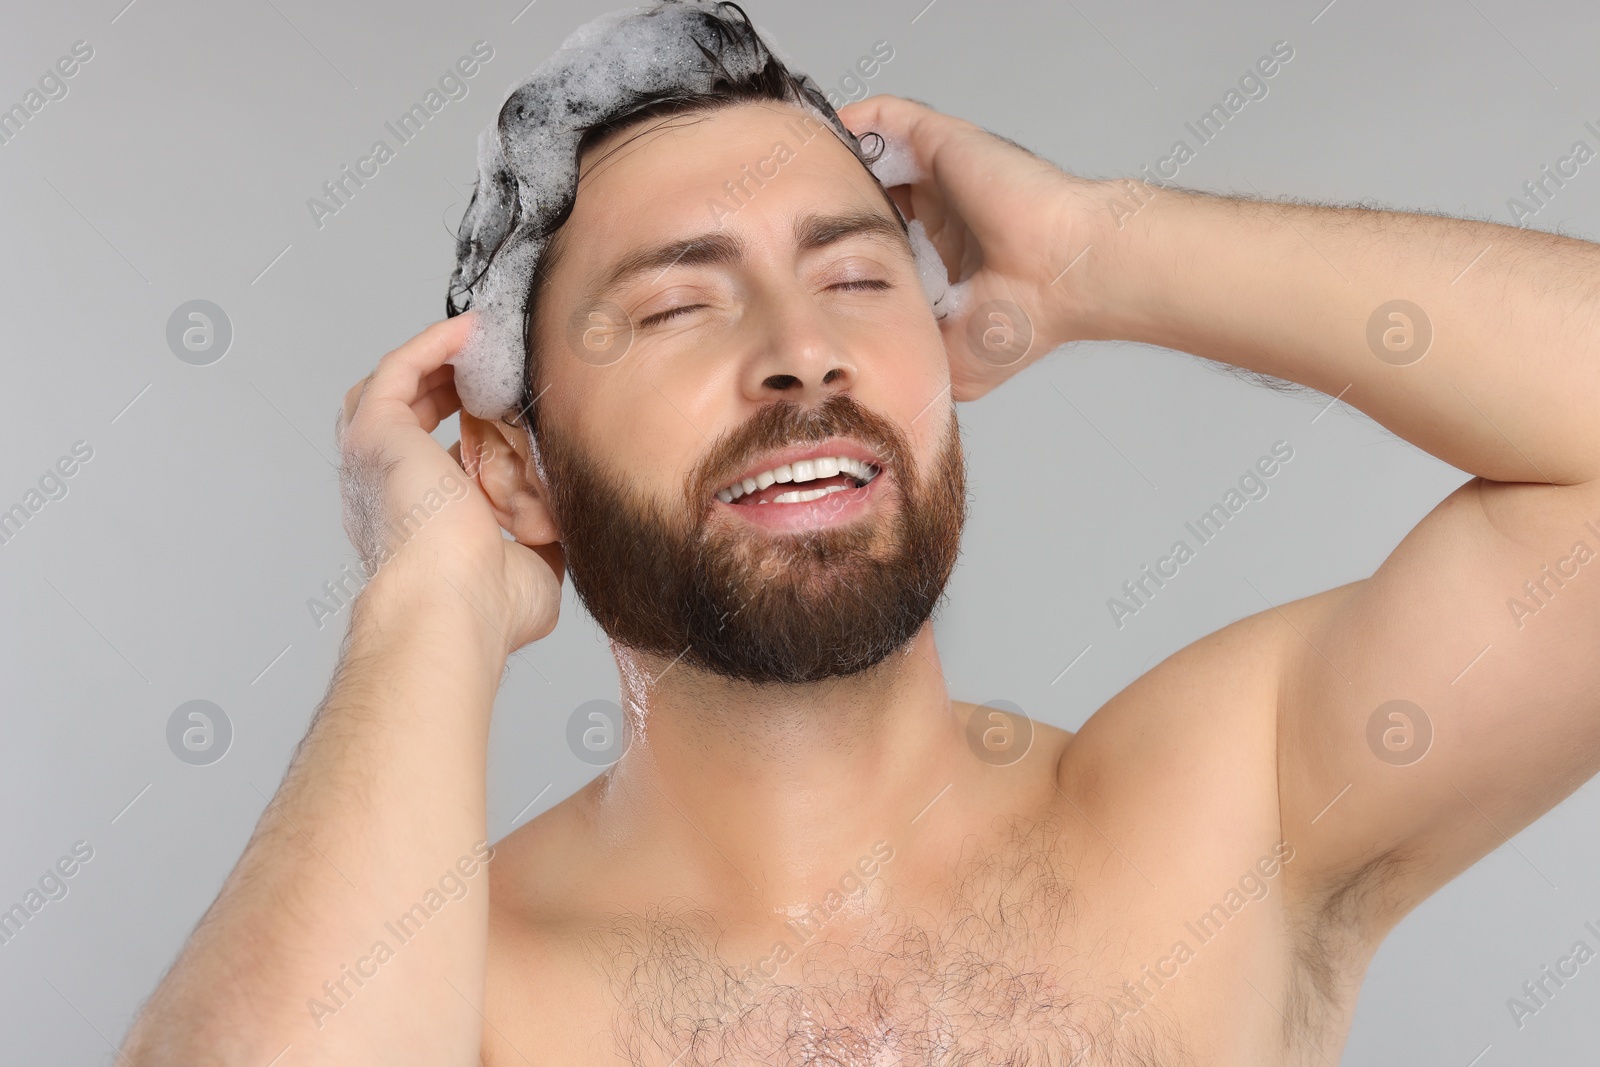 Photo of Happy man washing his hair with shampoo on grey background, closeup